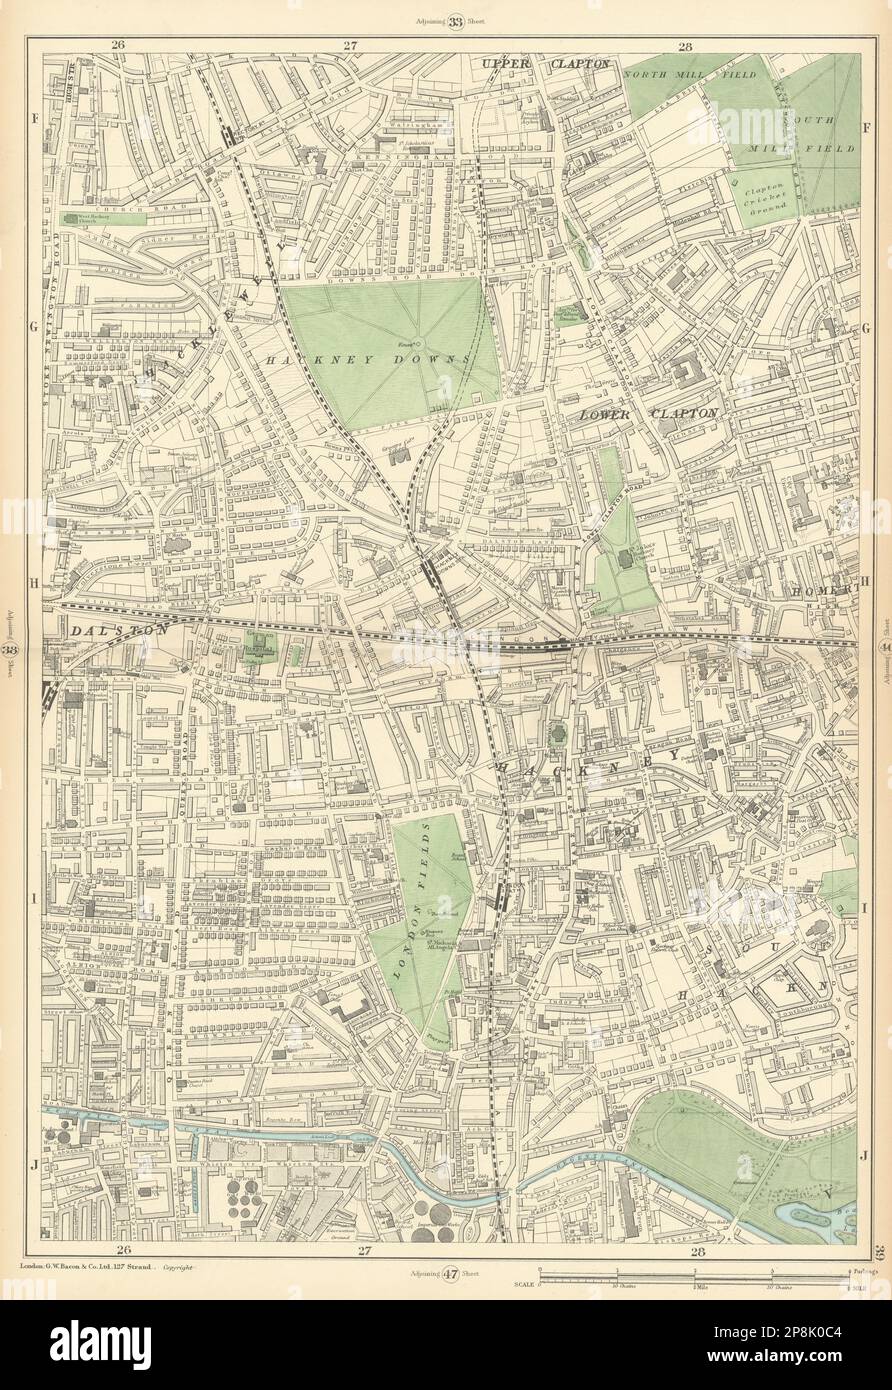 HACKNEY Lower Clapton Dalston Shacklewell London Fields Homerton 1900 old map Stock Photo